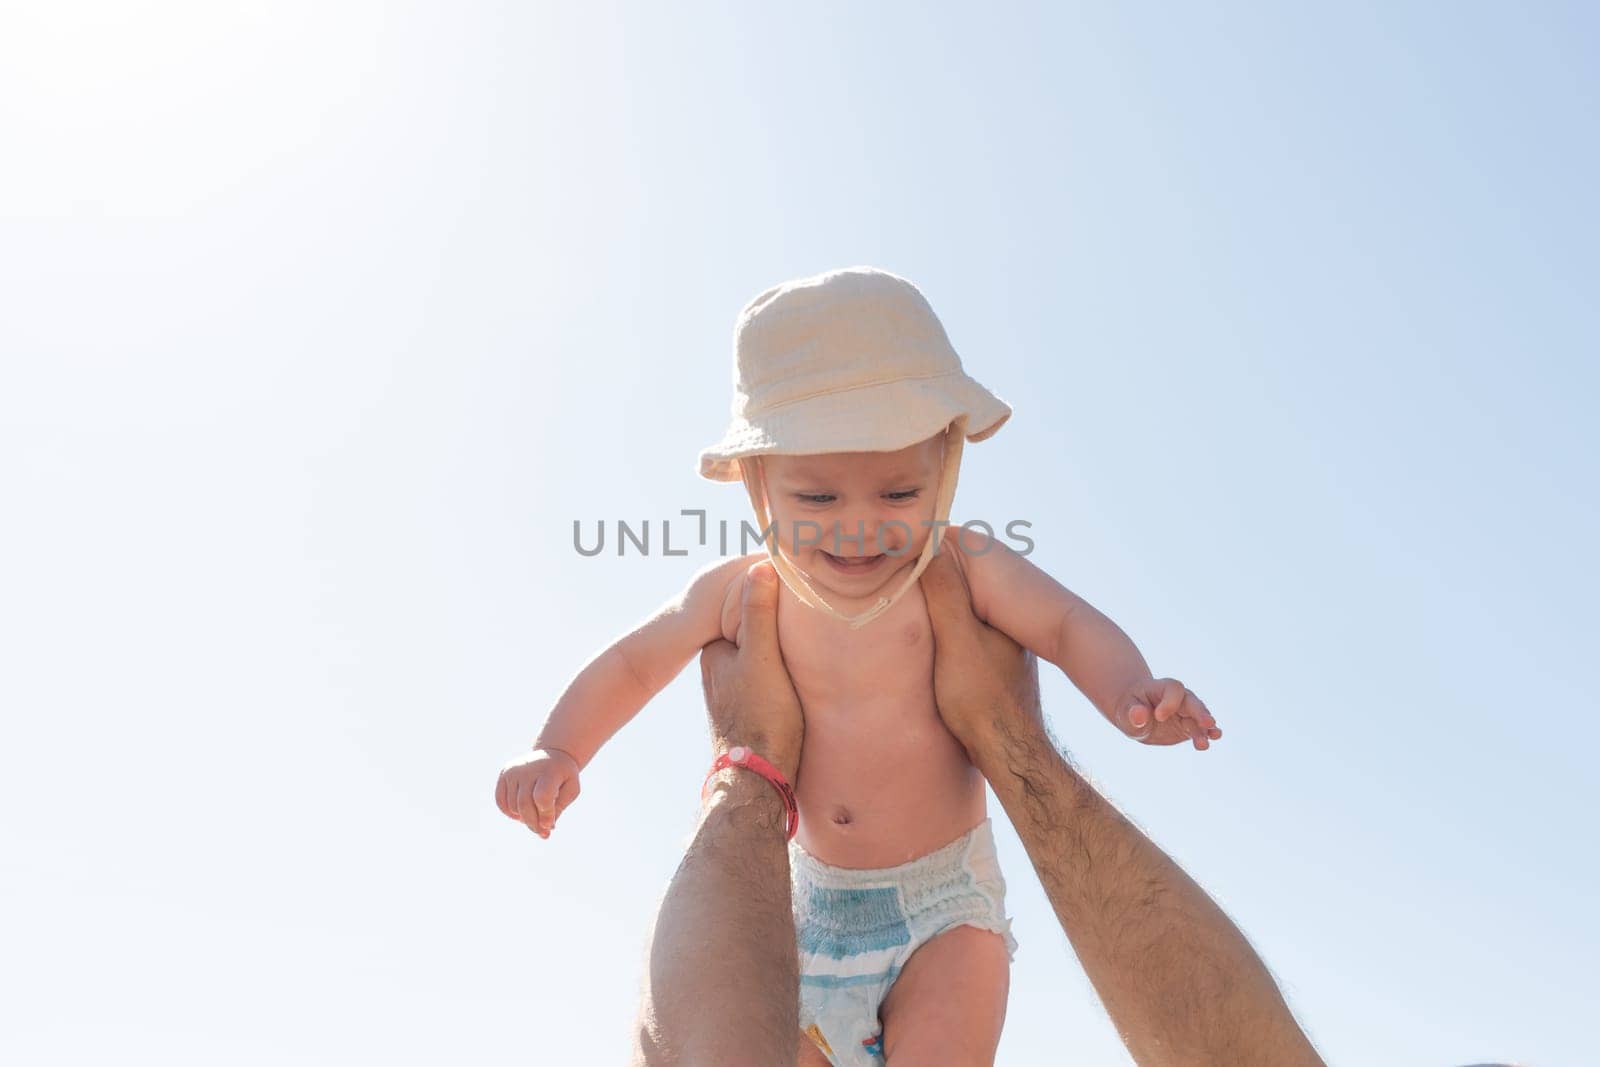 Father's playful lift of his baby under the sunny sky. Concept of nurturing and joy in baby's first year by Mariakray